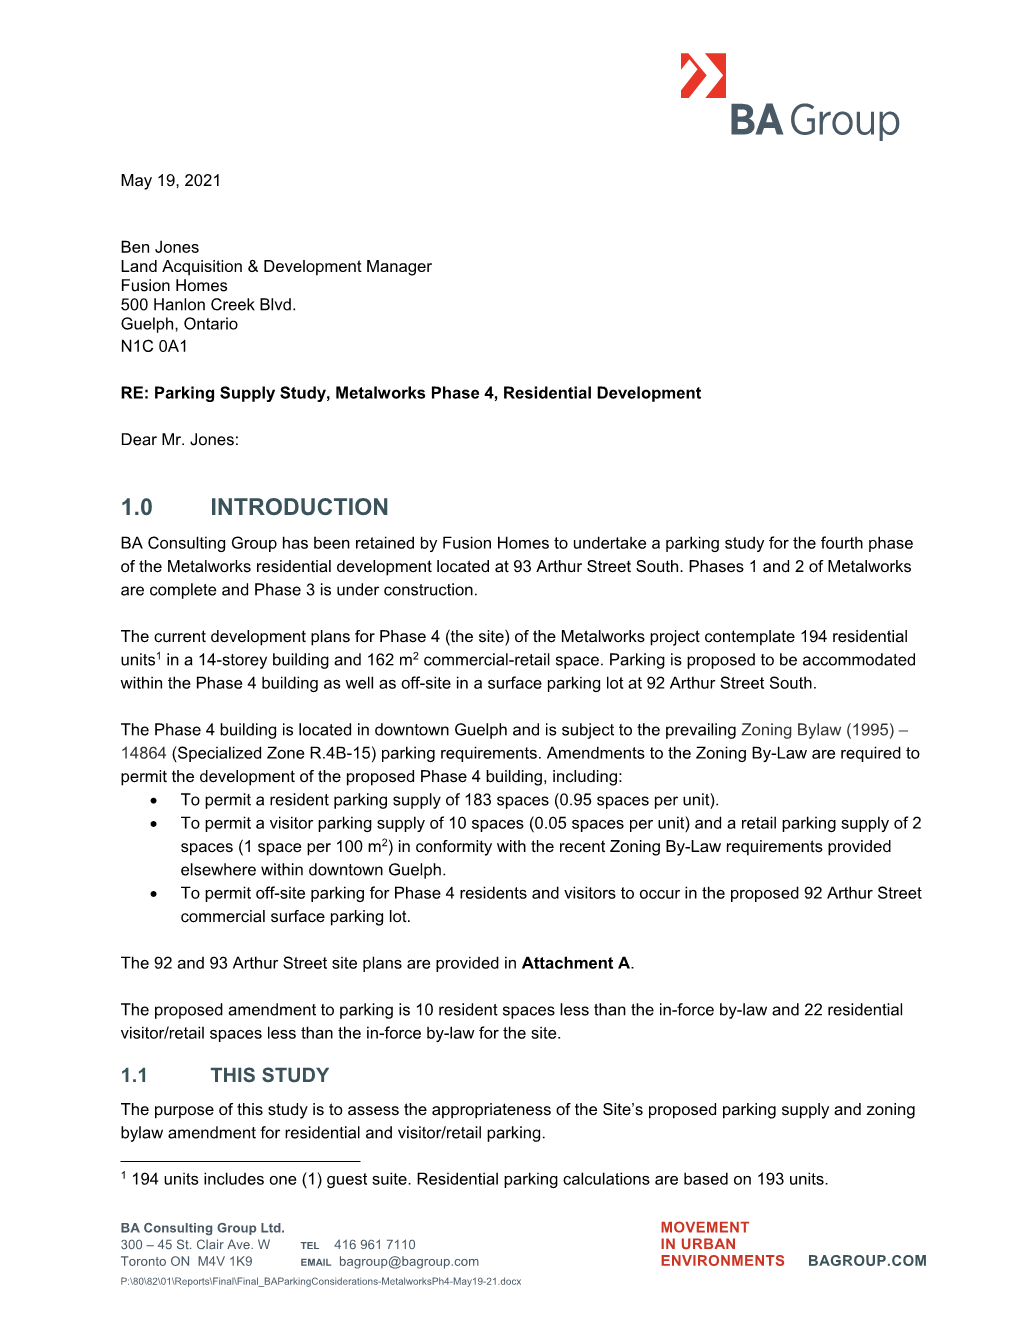 Parking Consideration Letter – May 2021